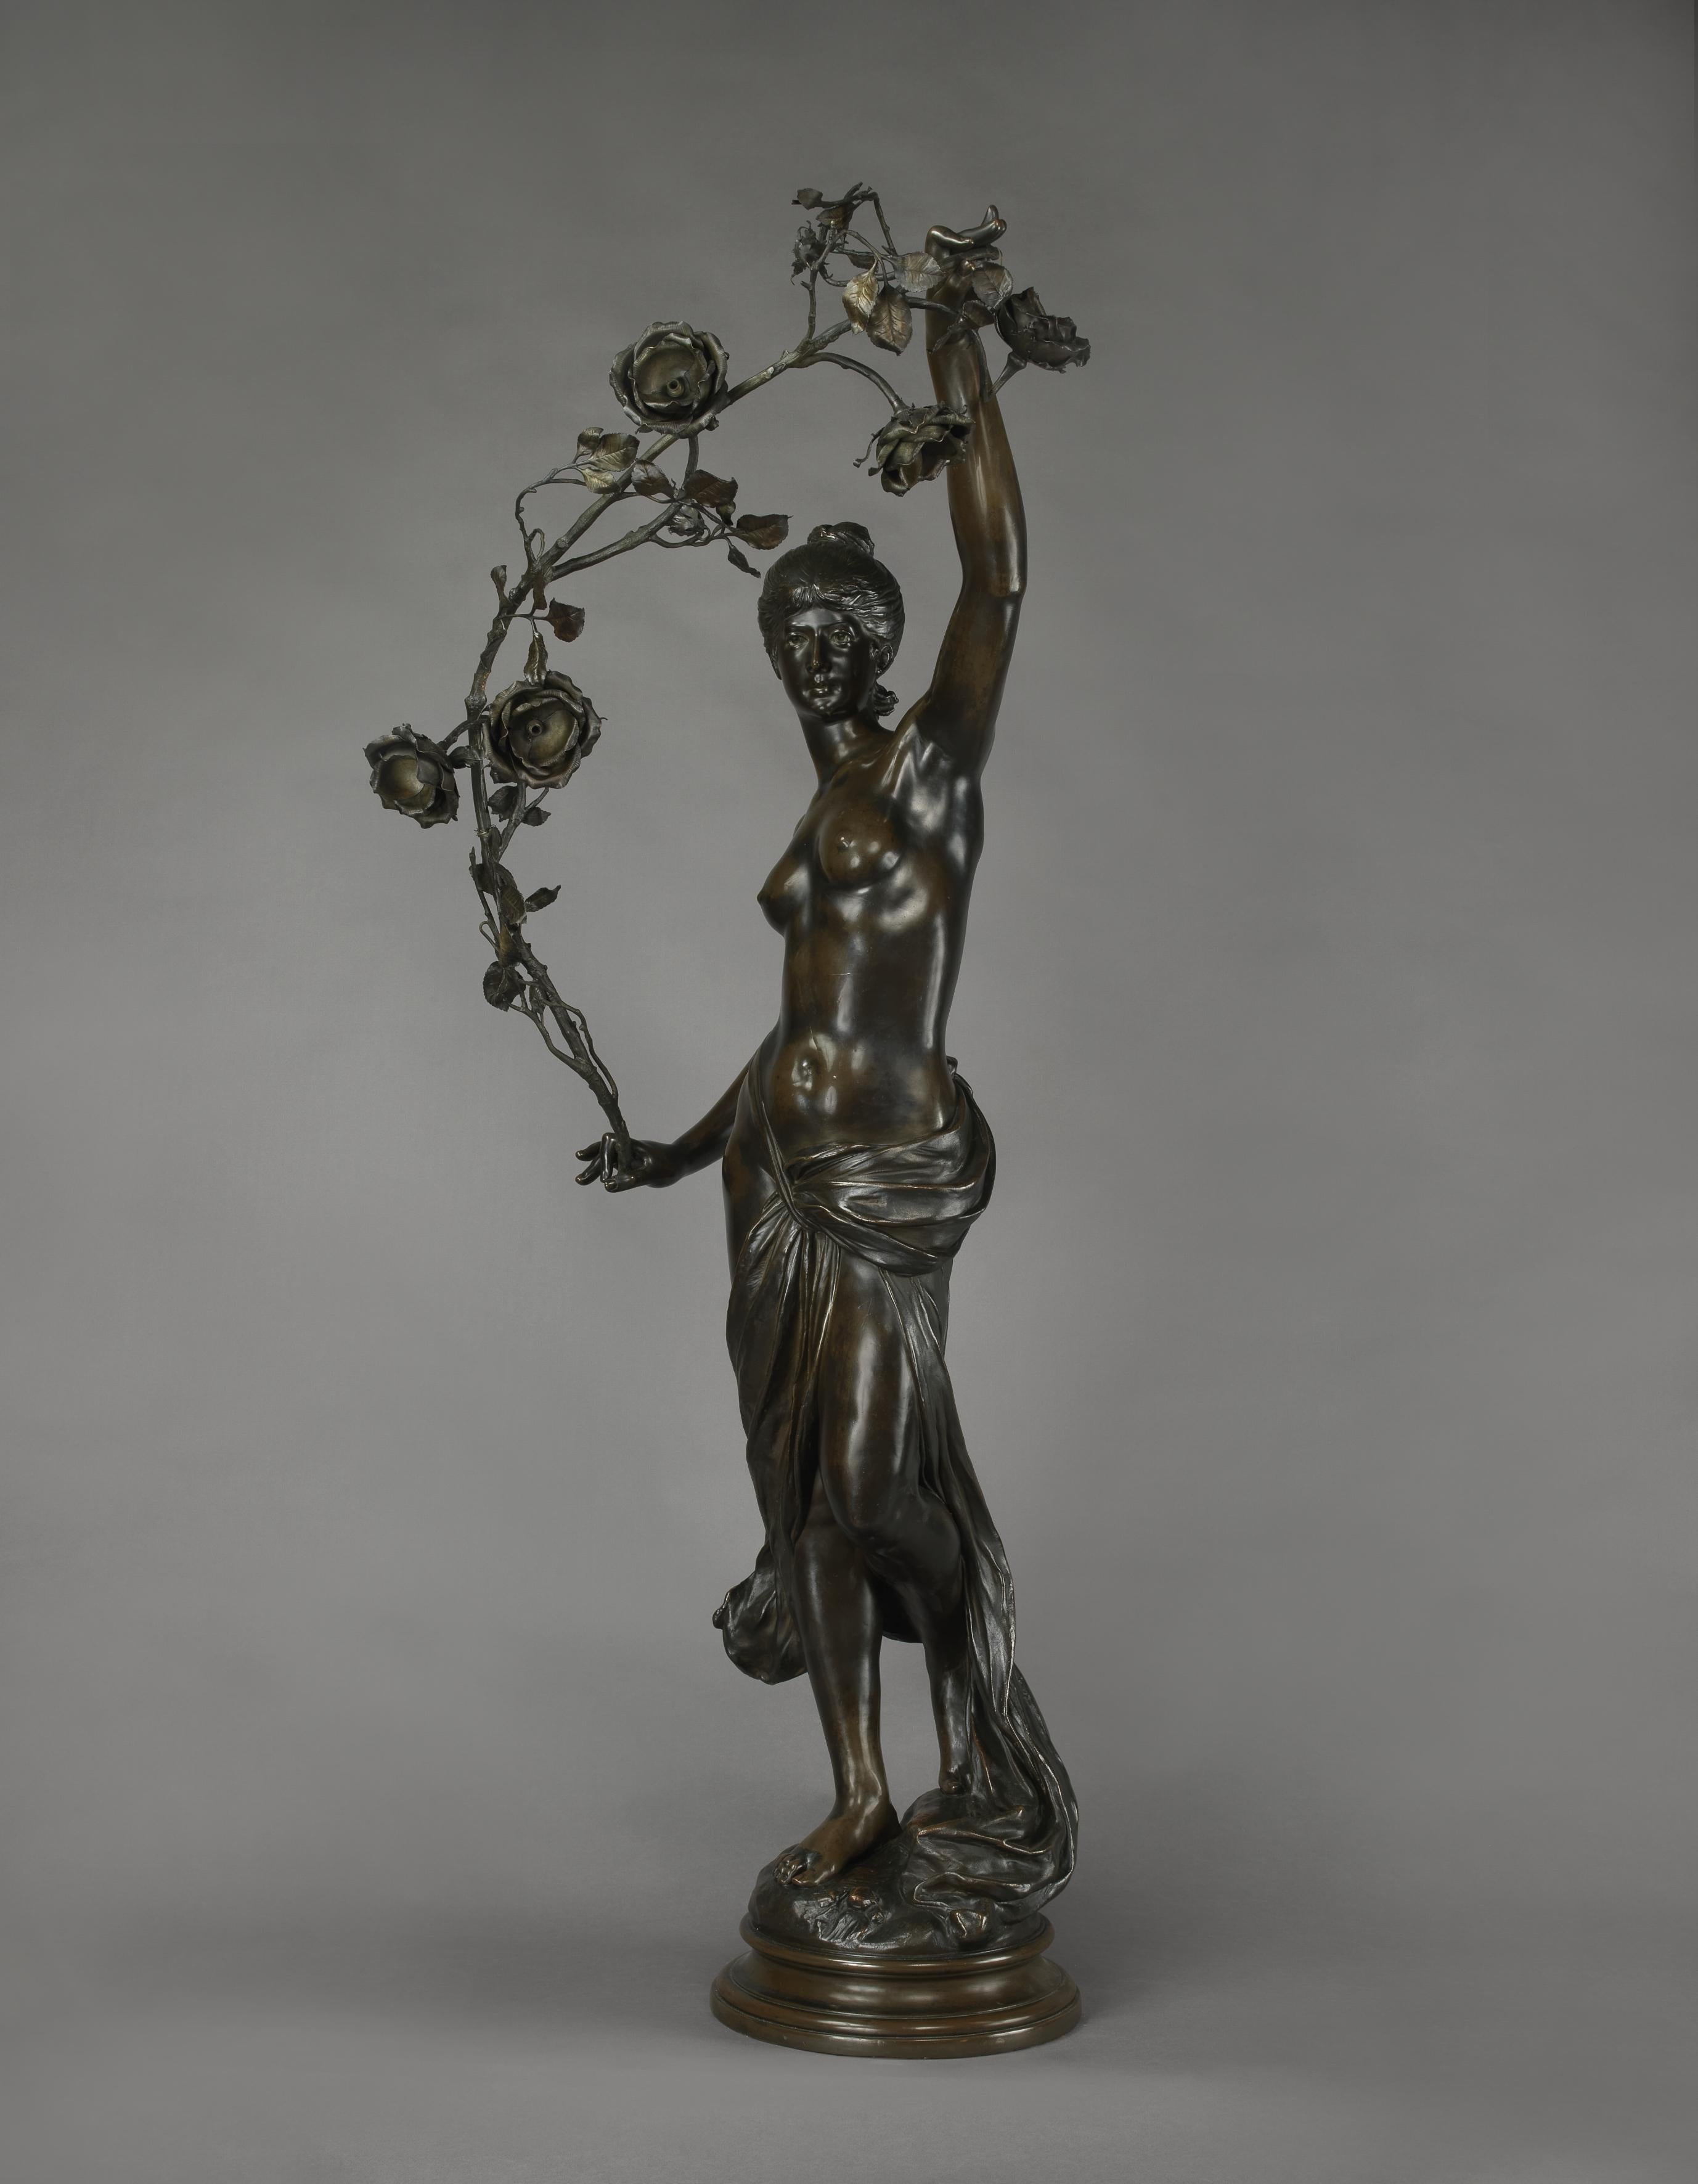 'Grand Nu Aux Feuillages', a fine patinated bronzed figural group by Alois Mayer. 

German, circa 1900. 

Signed 'A. Mayer'. 

Alois Mayer (1855-1936) Was a German Sculptor who worked mainly in bronze, creating statues, small sculptures and